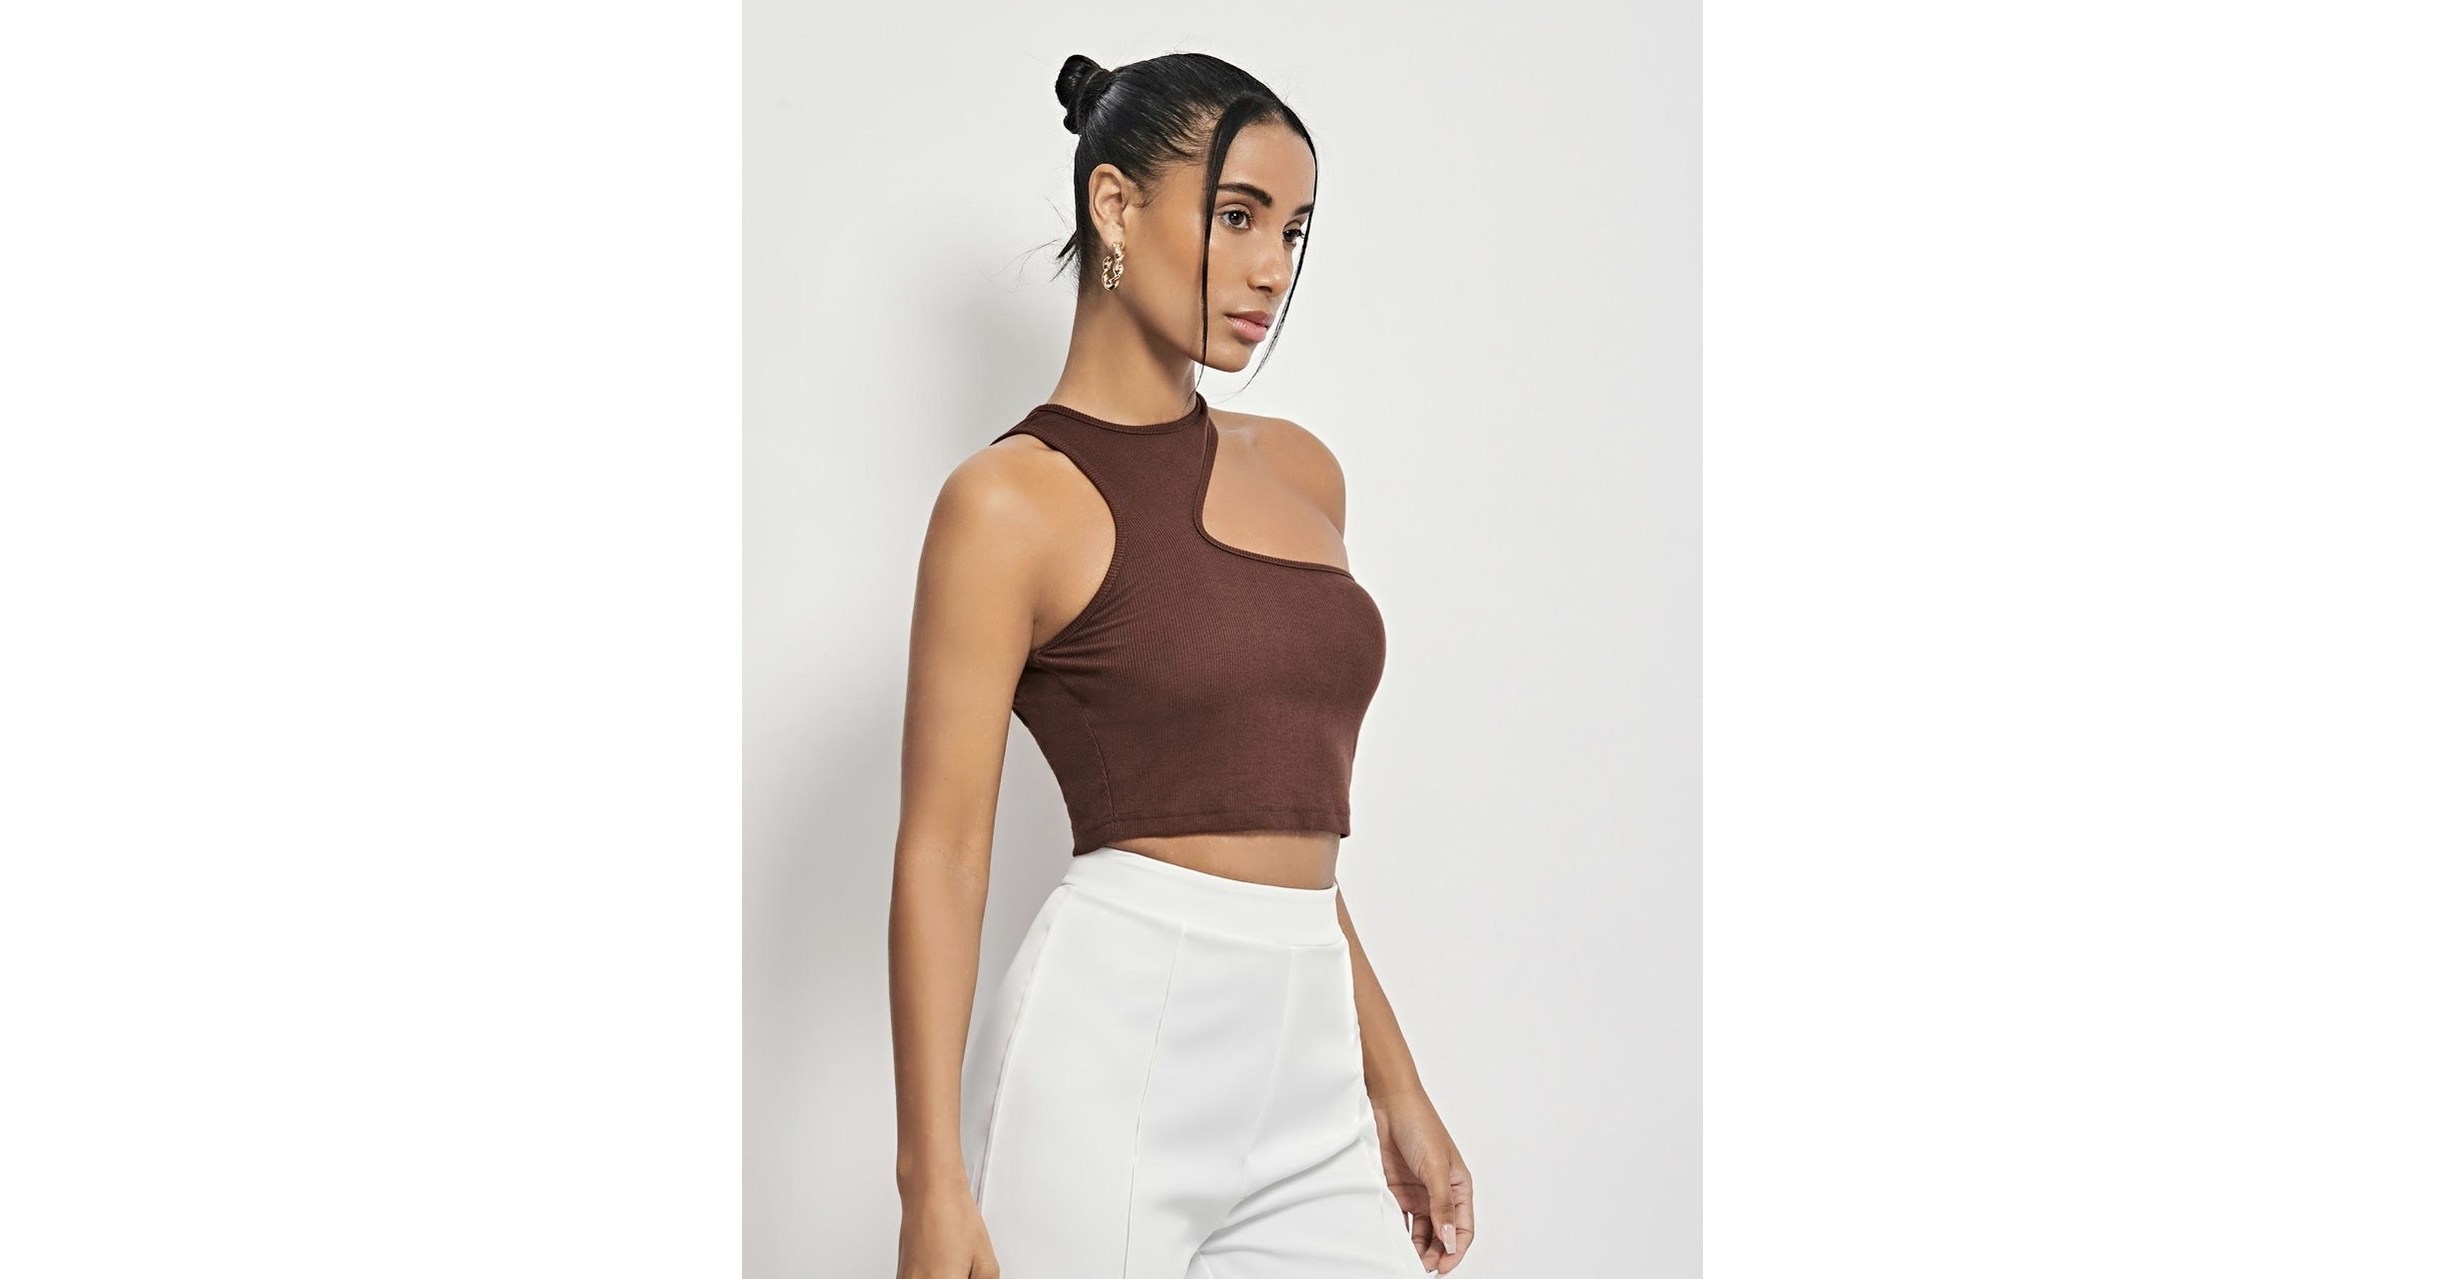 SHEIN Launches evoluSHEIN, New Clothing Line Designed to Make Purposeful Products Accessible for All